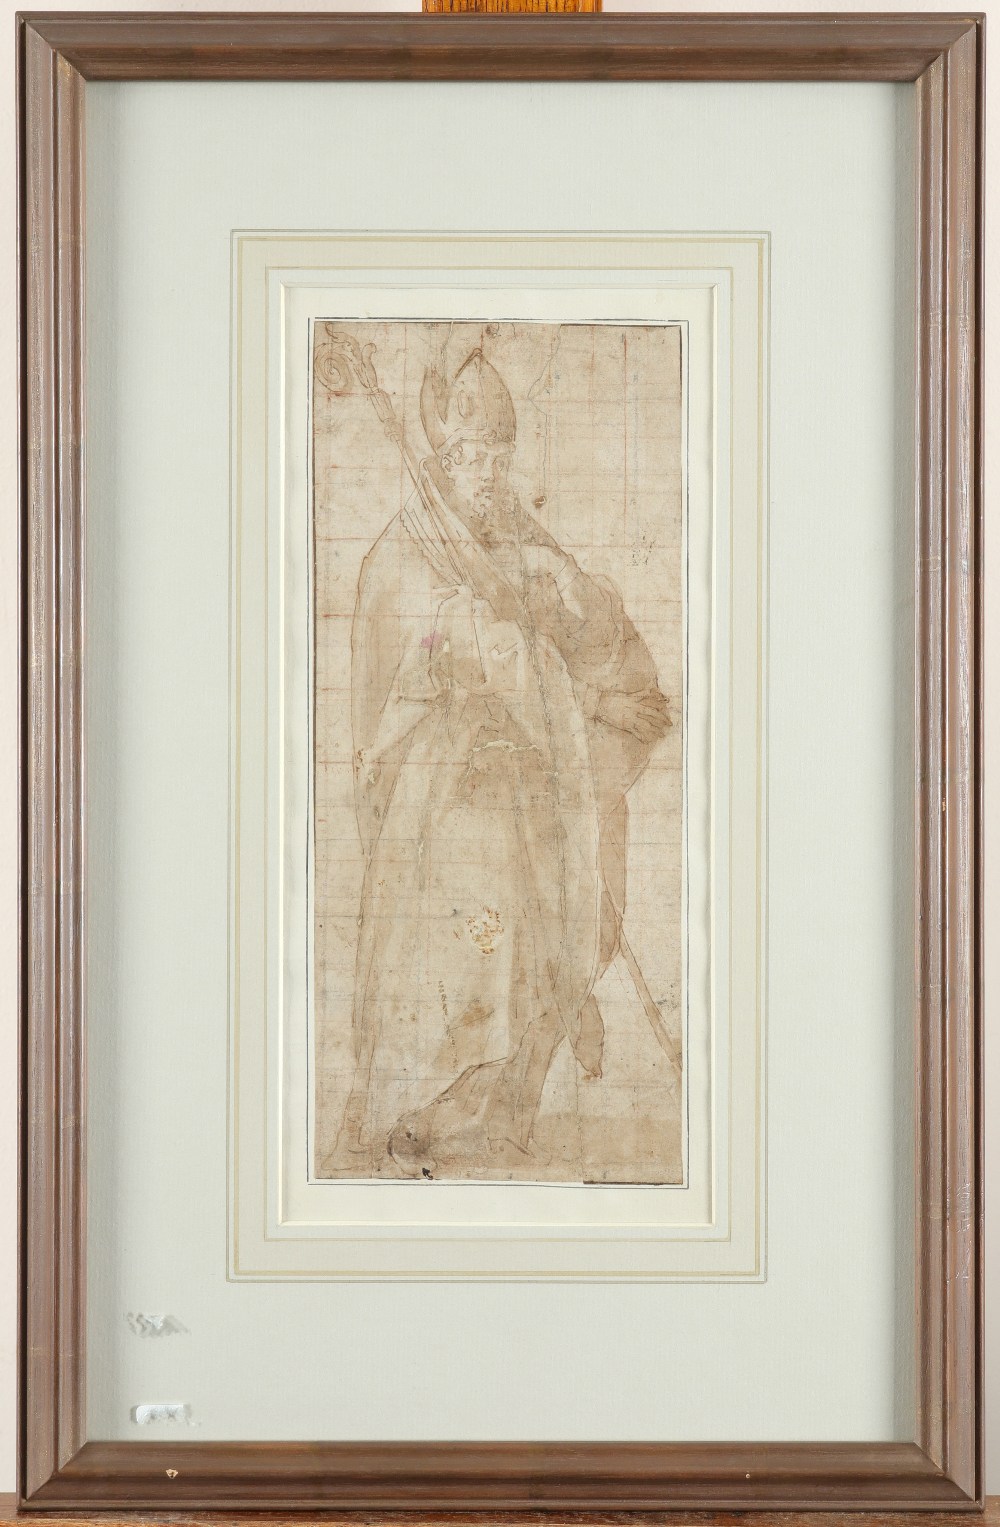 Tuscan School 16th Century Study of a bishop, full length holding a crozier Pen ink, wash and - Image 2 of 3